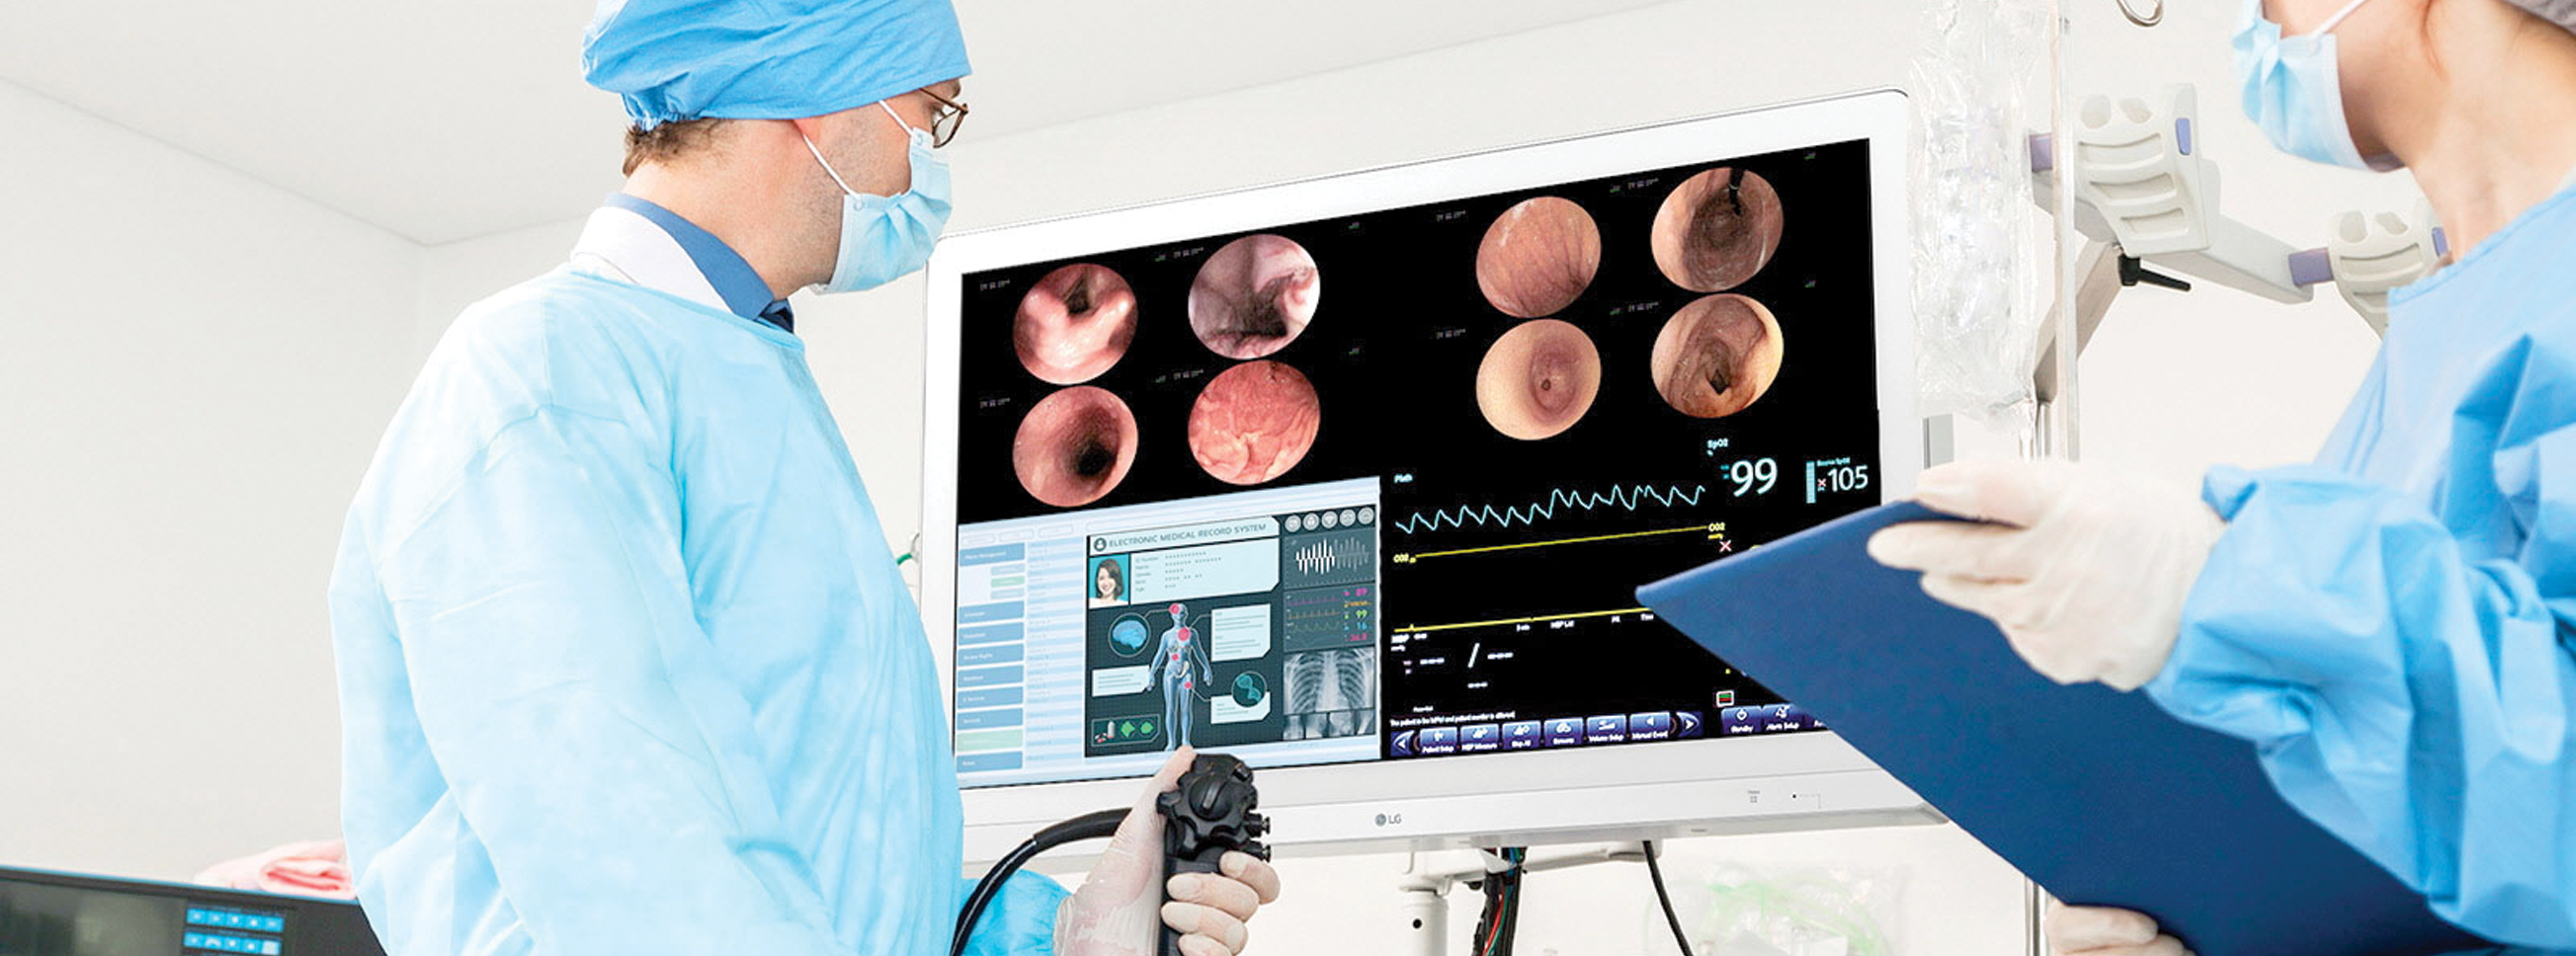 Whether you're looking to purchase new surgical monitors or curious about switching to LG for your replacement surgical monitors, we're here to help.